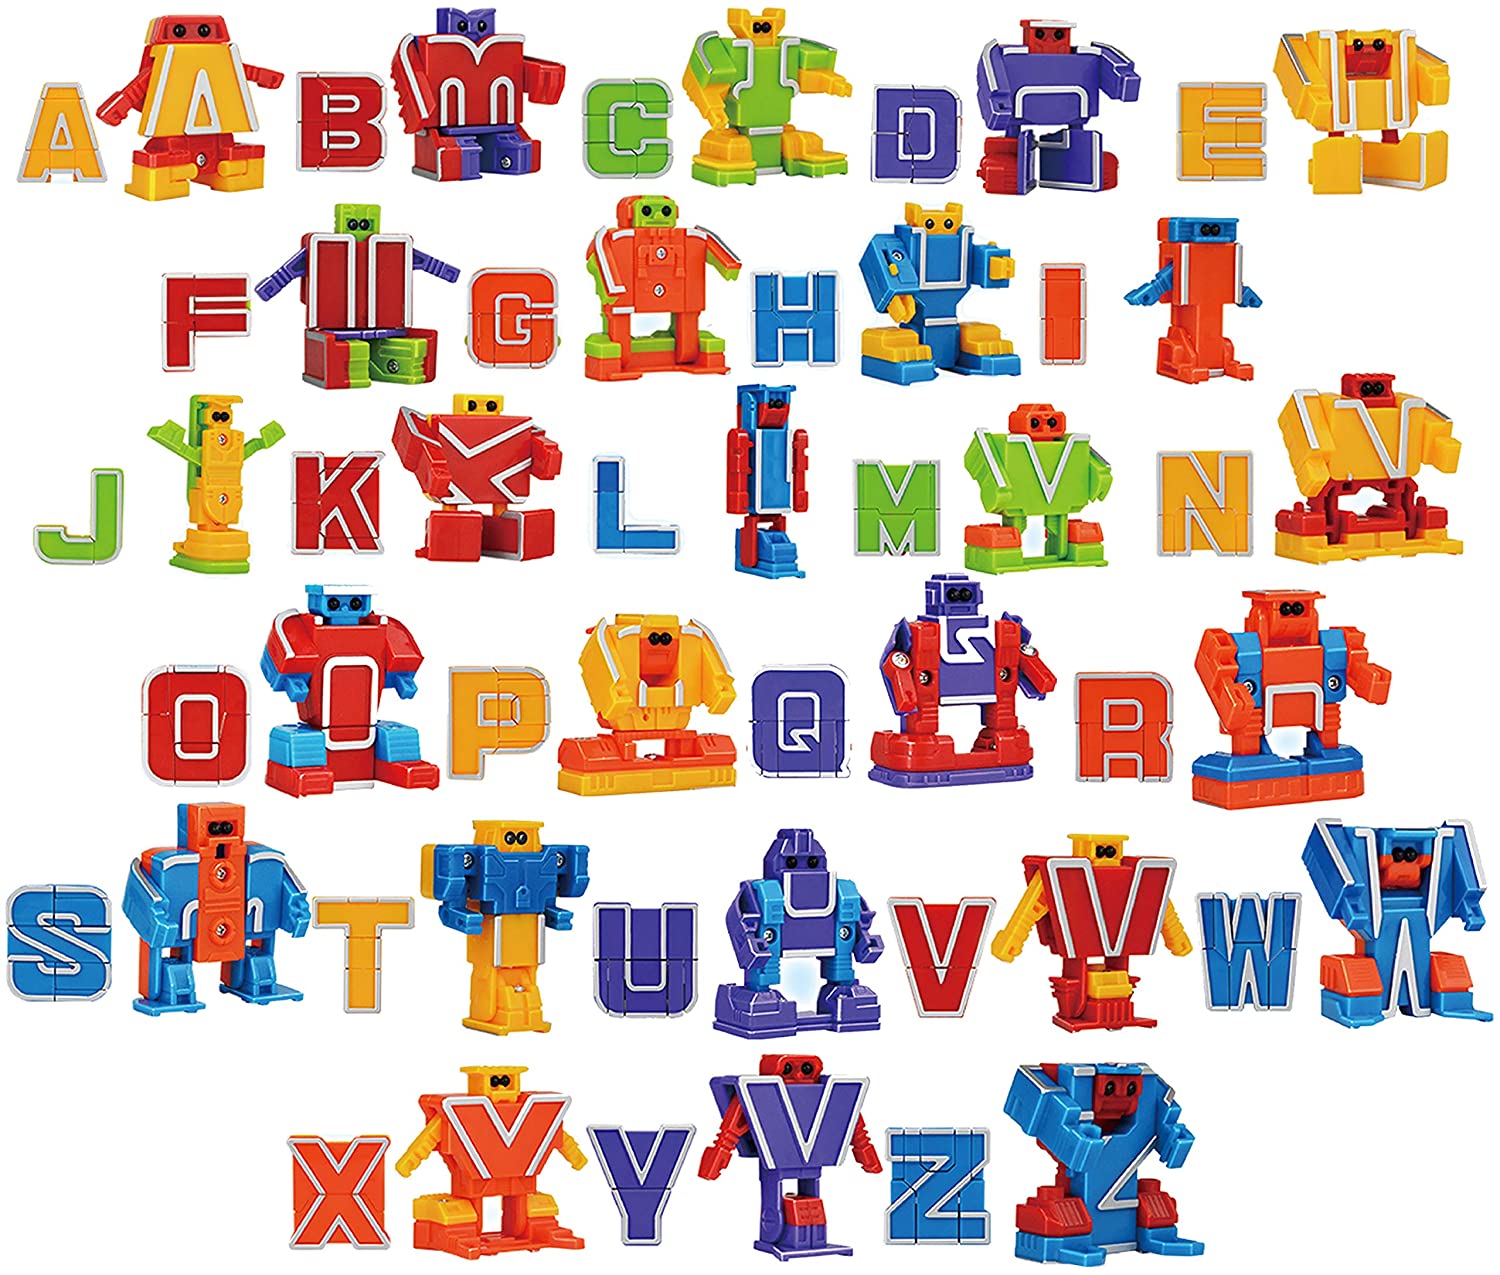 26 Pieces Alphabet Robot Transformer Action Figure Autobots Toys for Kids ABC Learning Gift for Birthday Party,School Classroom Rewards Carnival Prizes,Pre-School Education Toy 